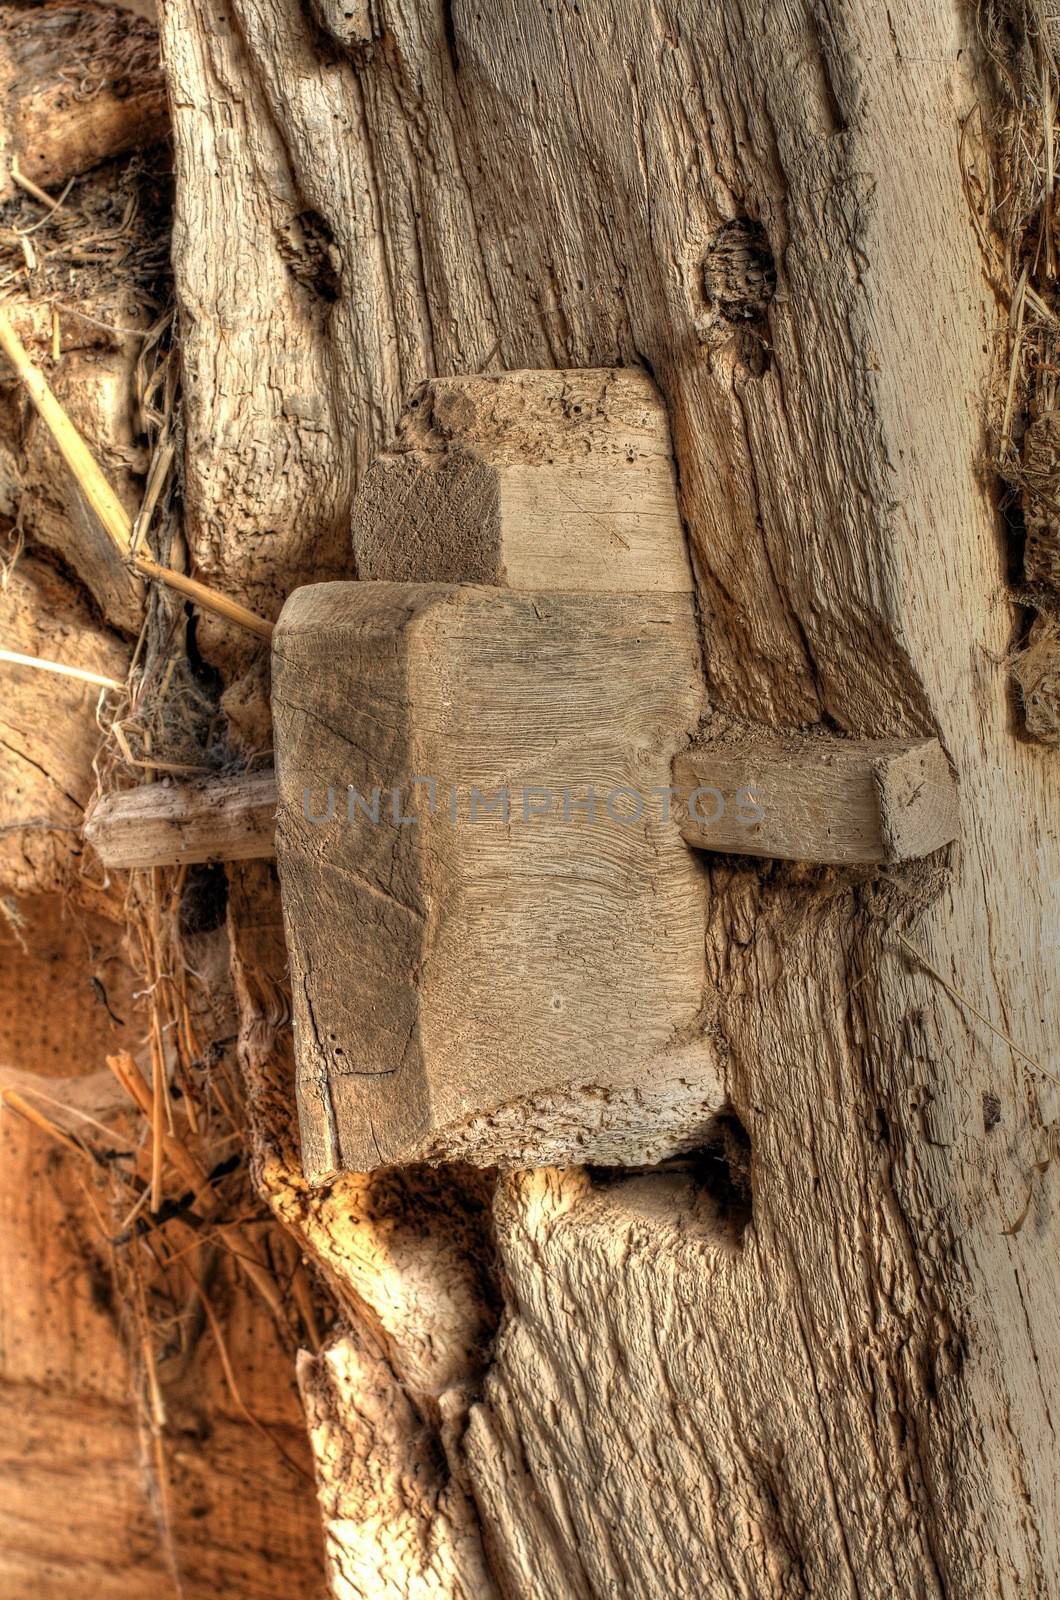 Mortise and Tenon pegged joint detail. Old Worcestershire barn, England.